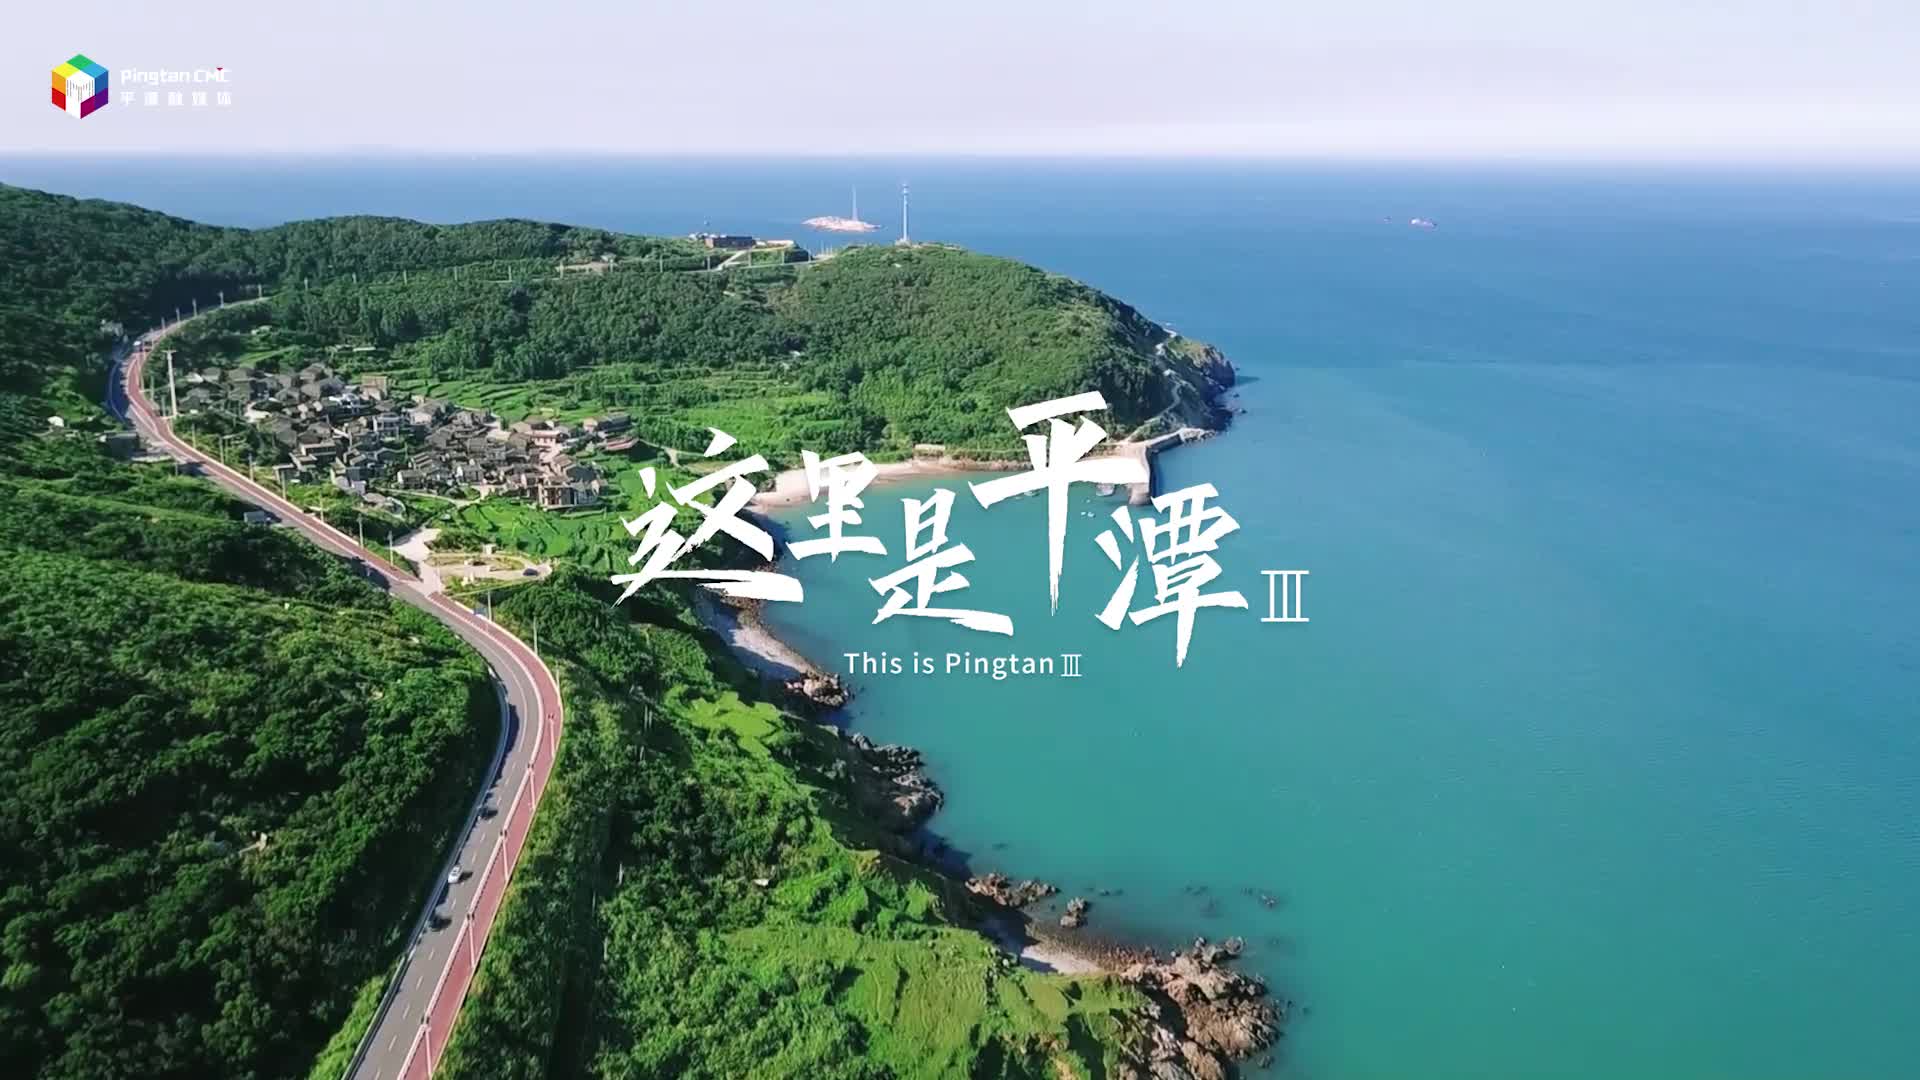 This is Pingtan Ⅲ